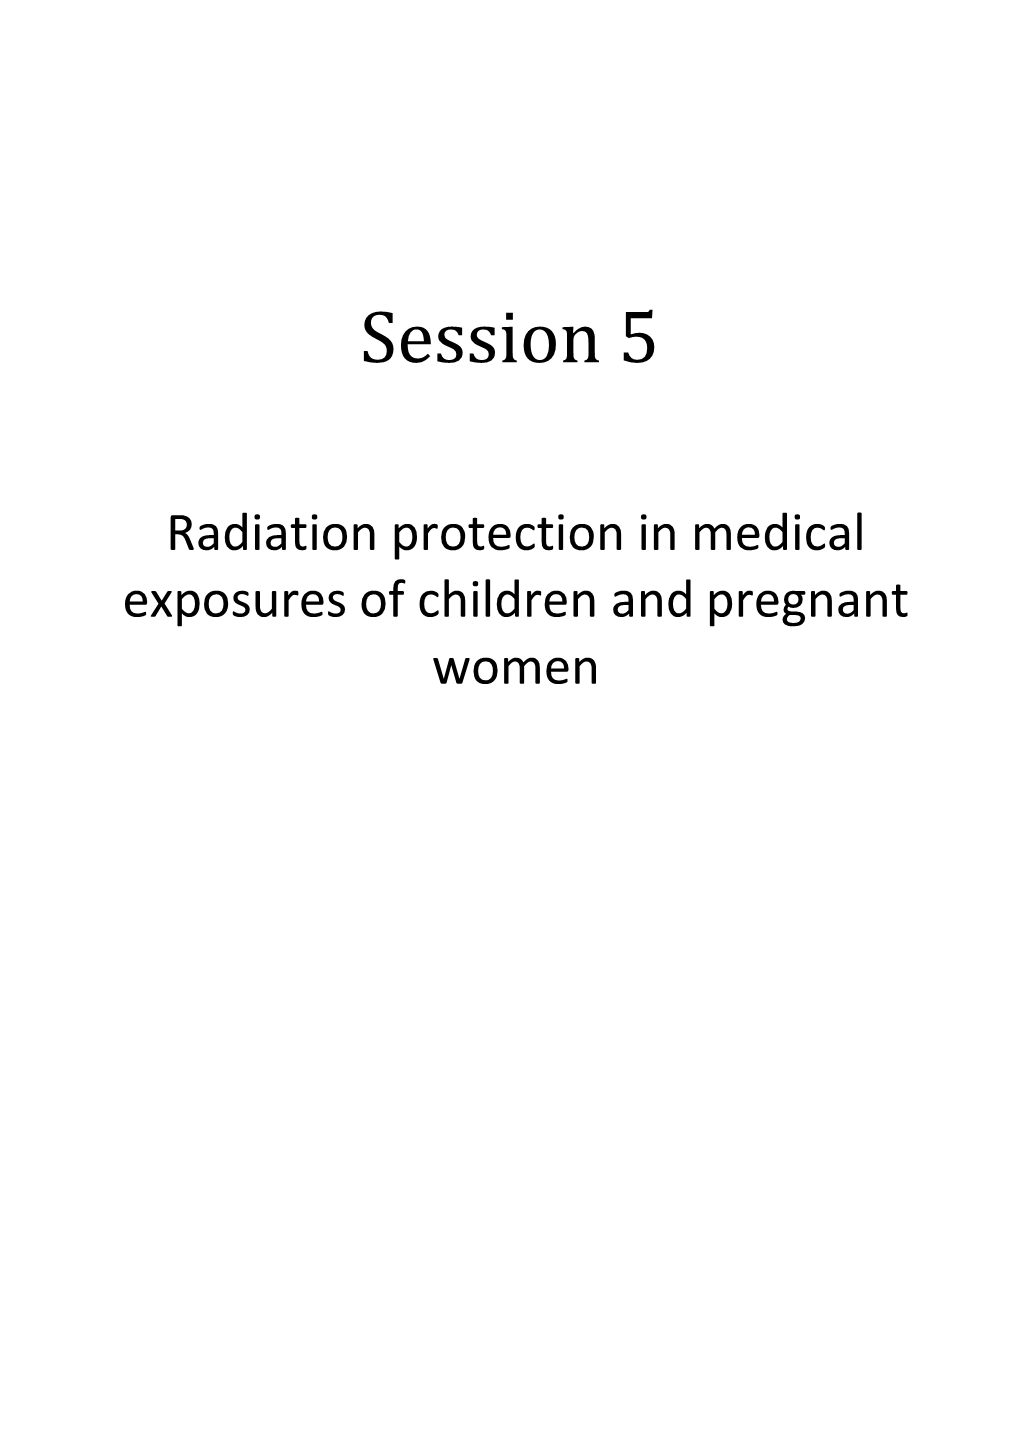 Session 5: Radiation Protection in Medical Exposures of Children and Pregnant Women